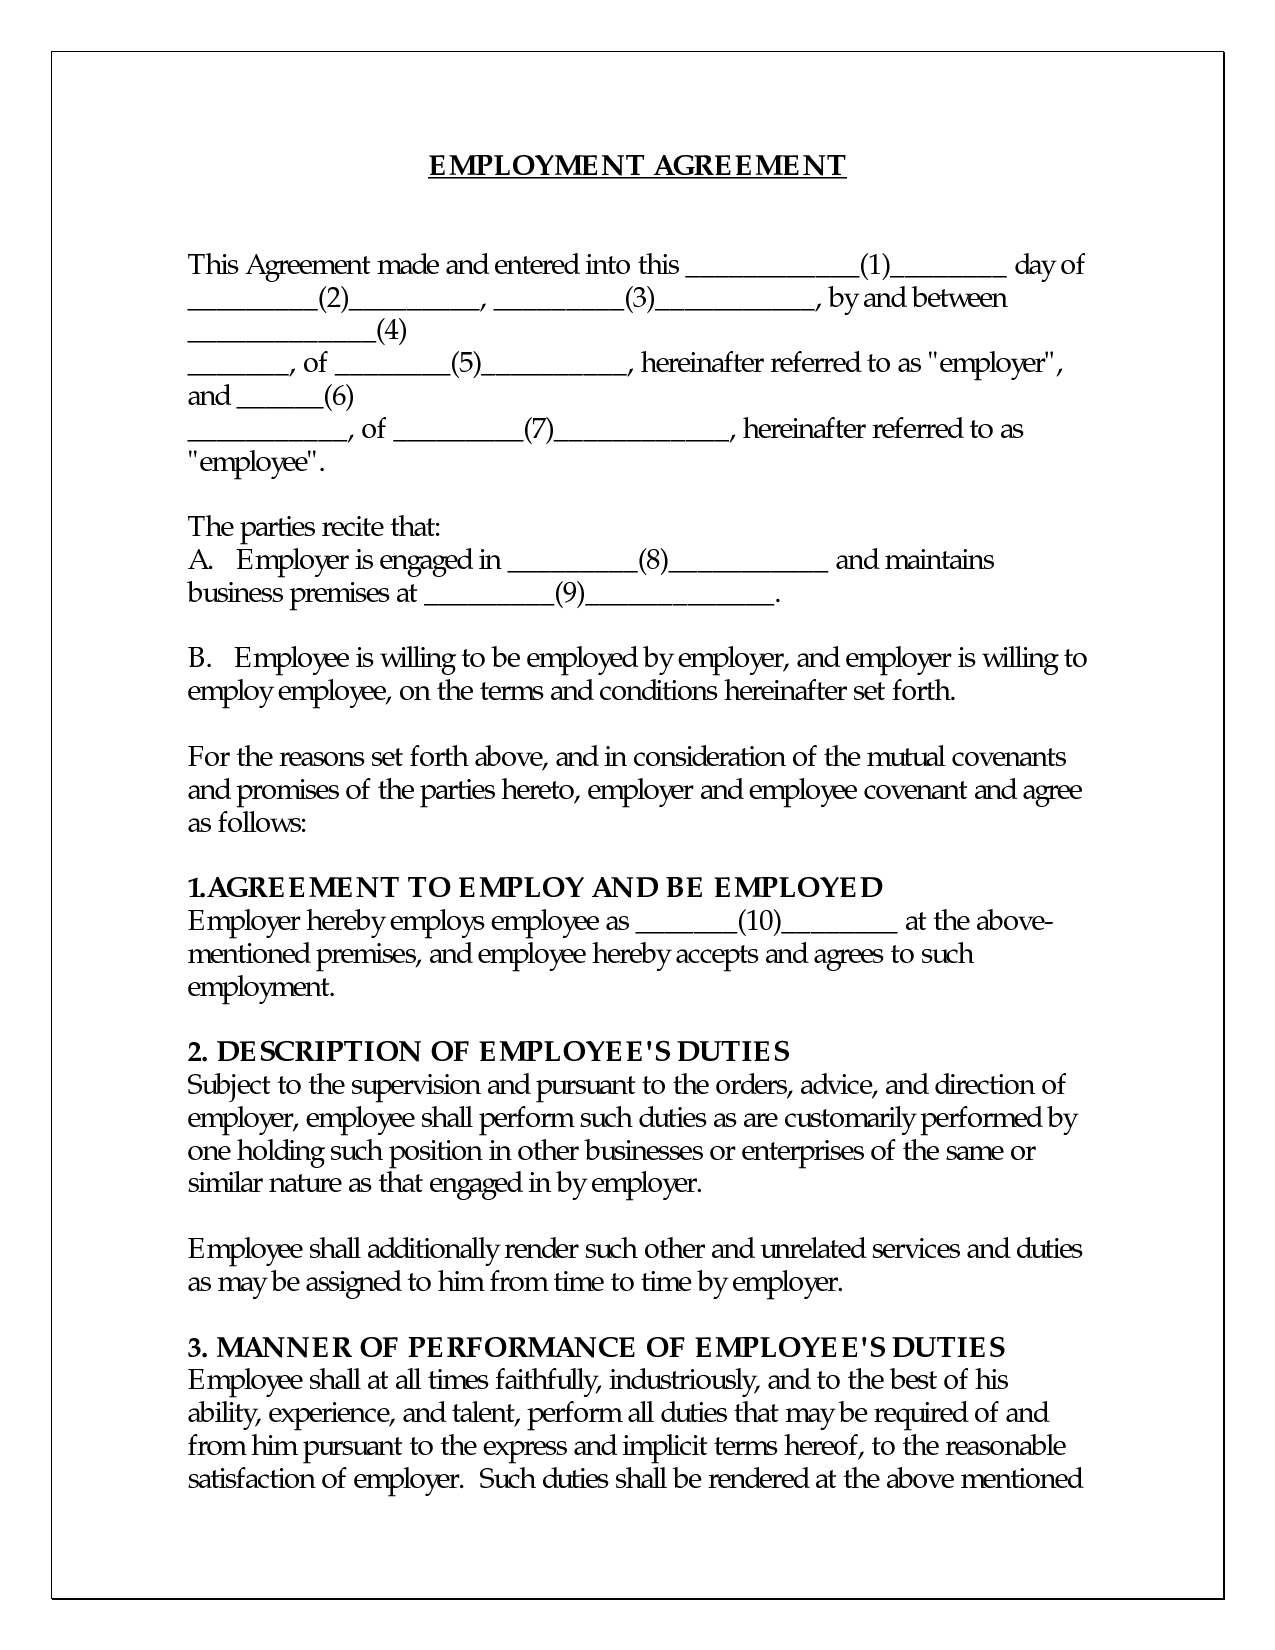 employment-agreement-sample-free-printable-documents